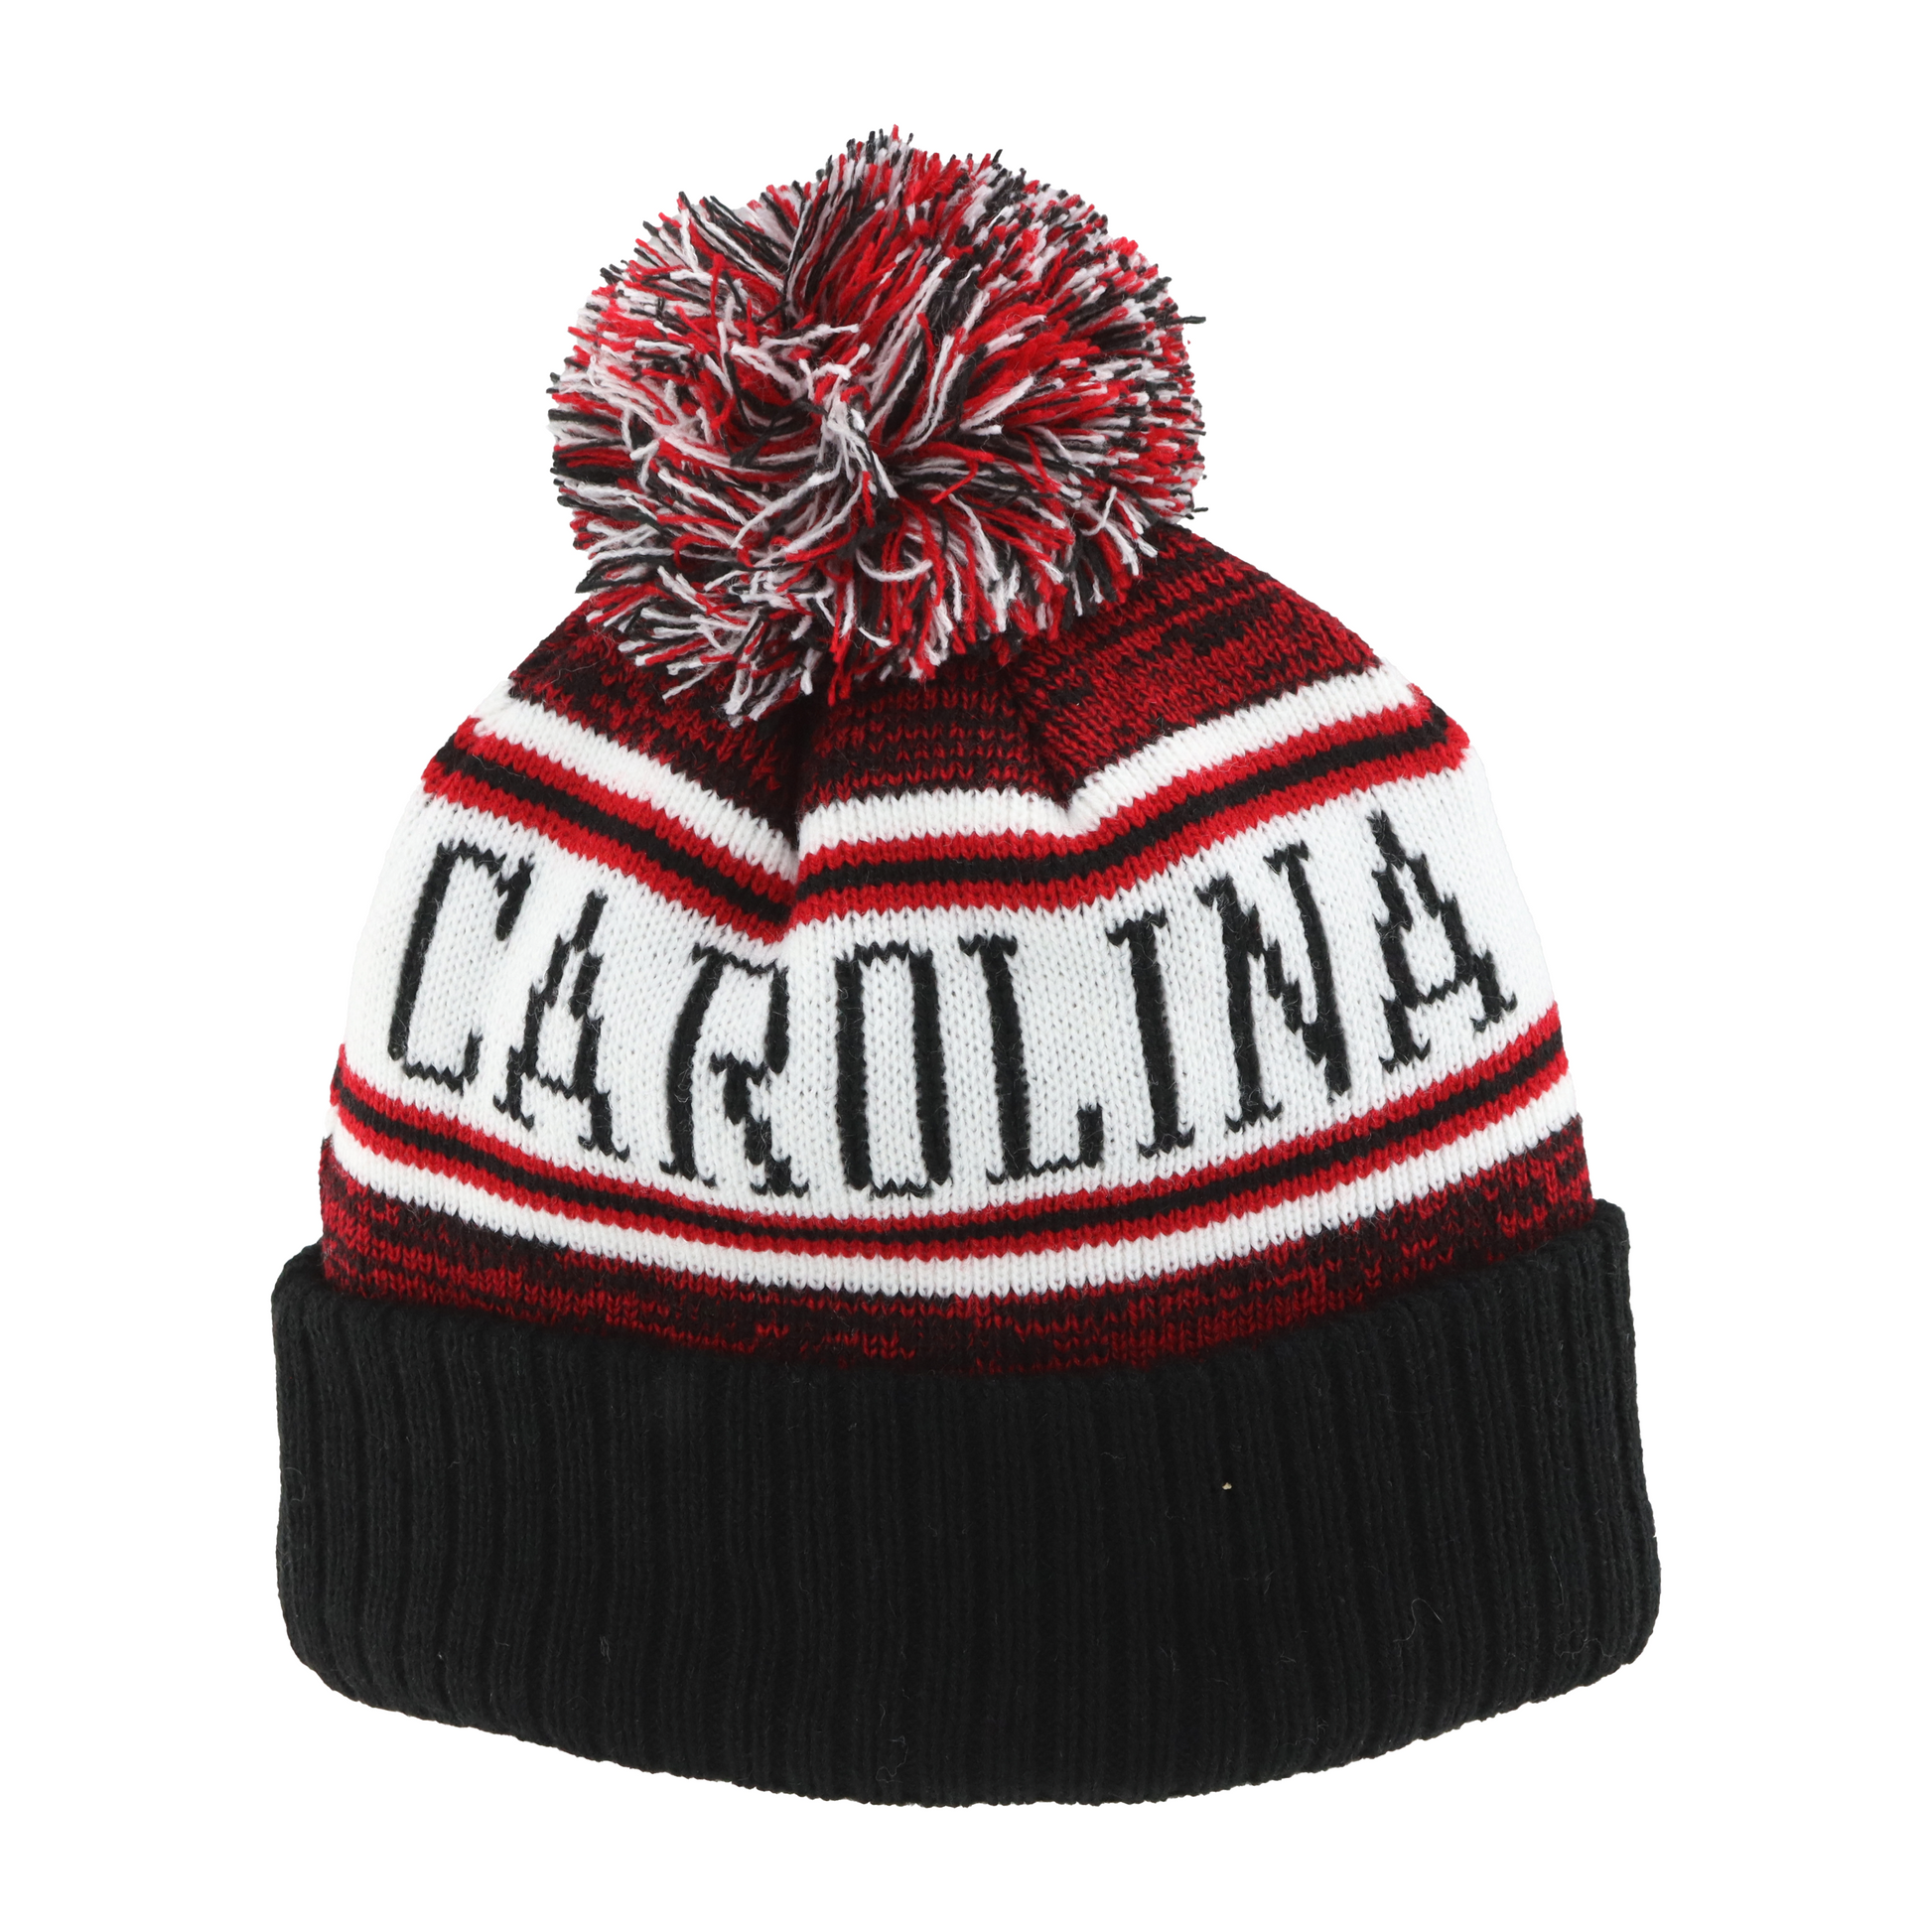 Back: Red black and white cuffed pom with Carolina written on beanie